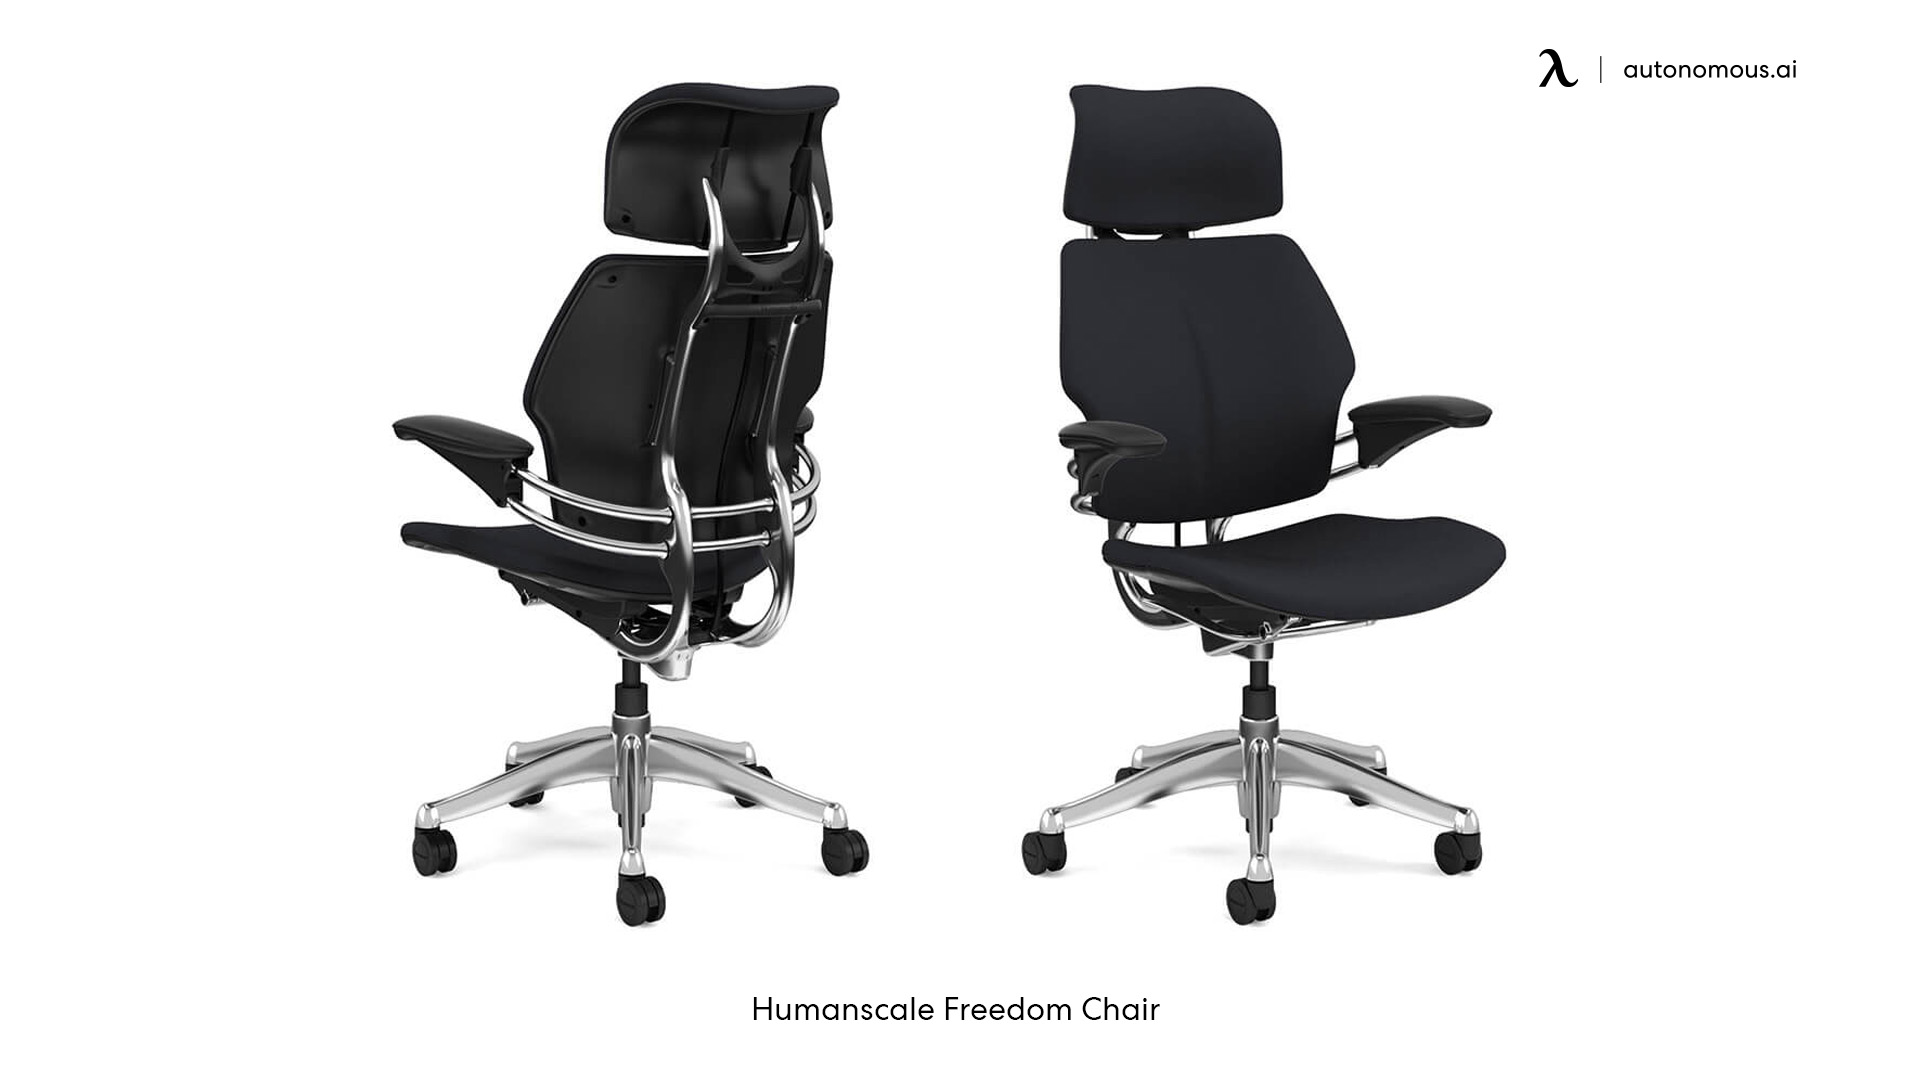 Humanscale Freedom fancy office chair